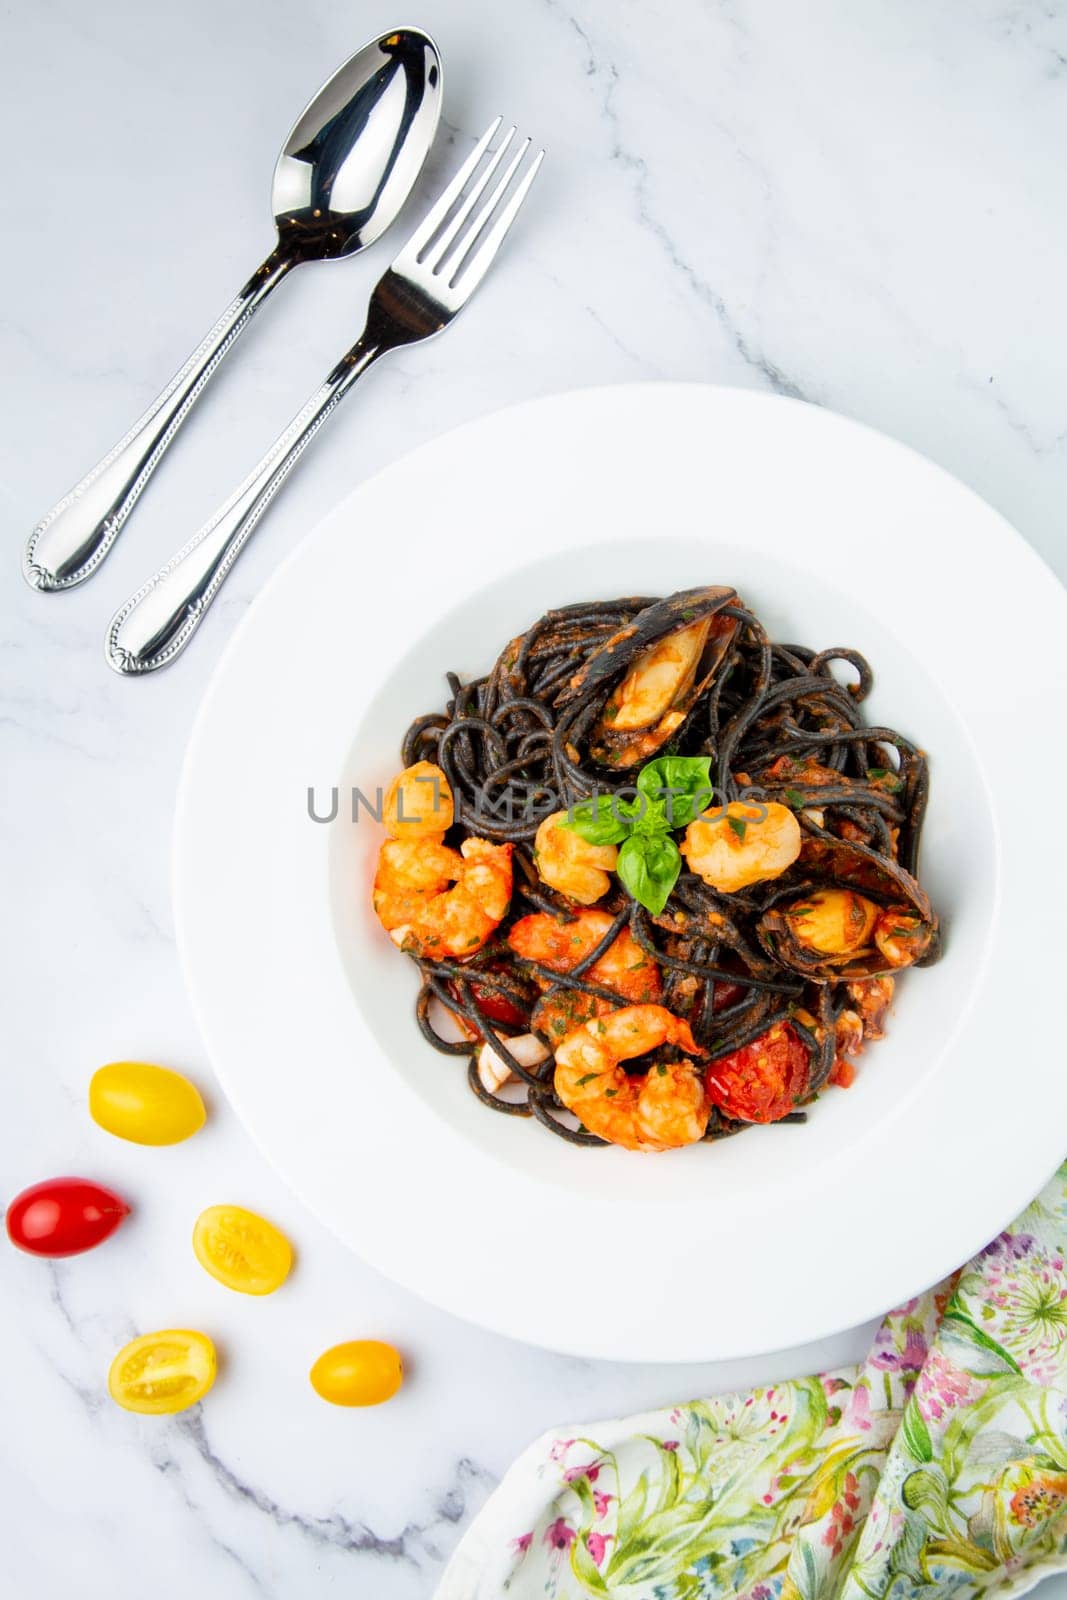 black noodles with mussels, shrimp, tomatoes and herbs